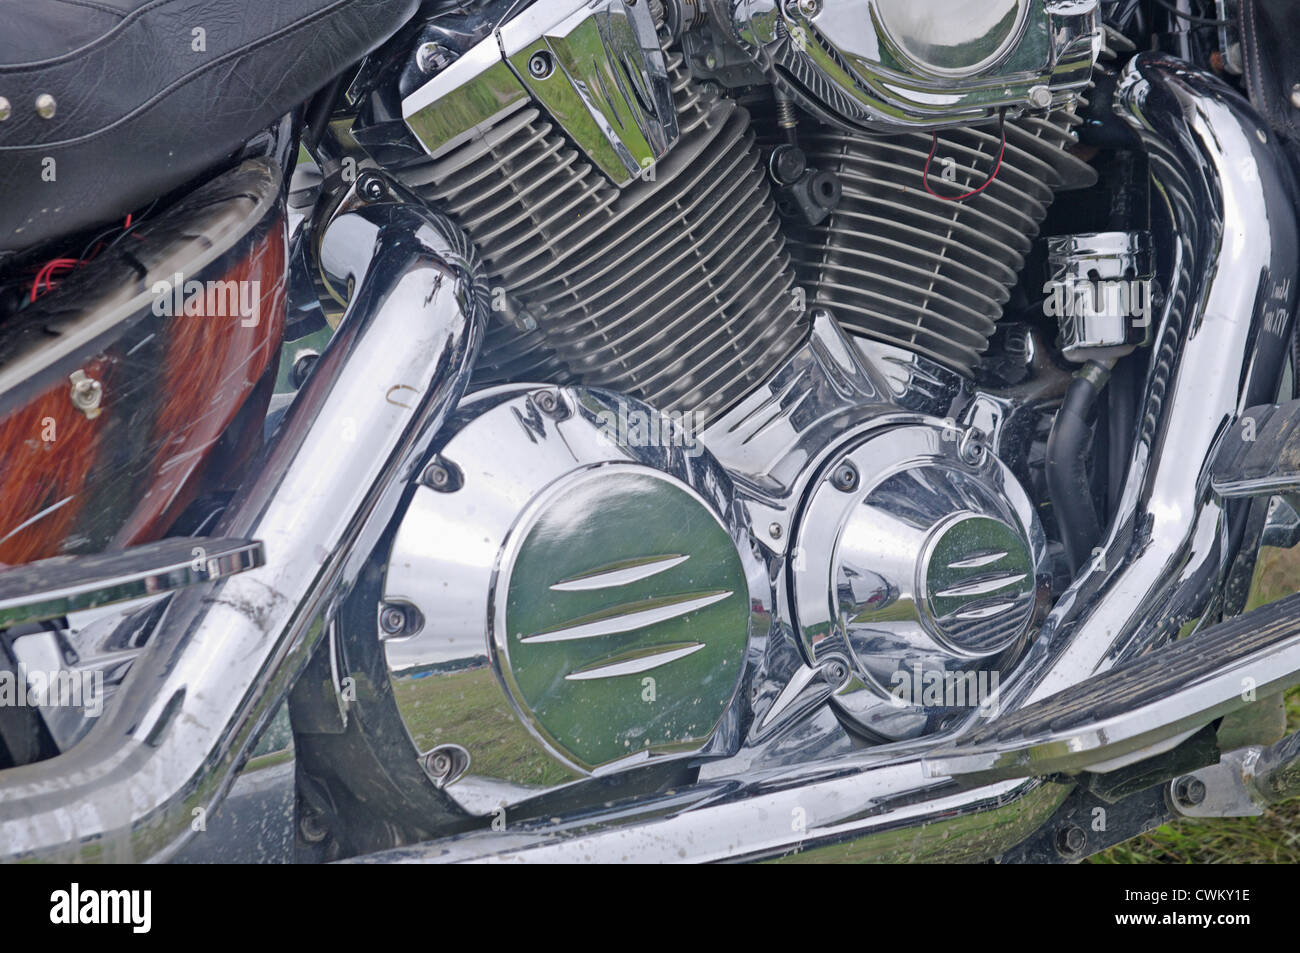 V-Twin motorcycle motor, chrome plated and polished Stock Photo